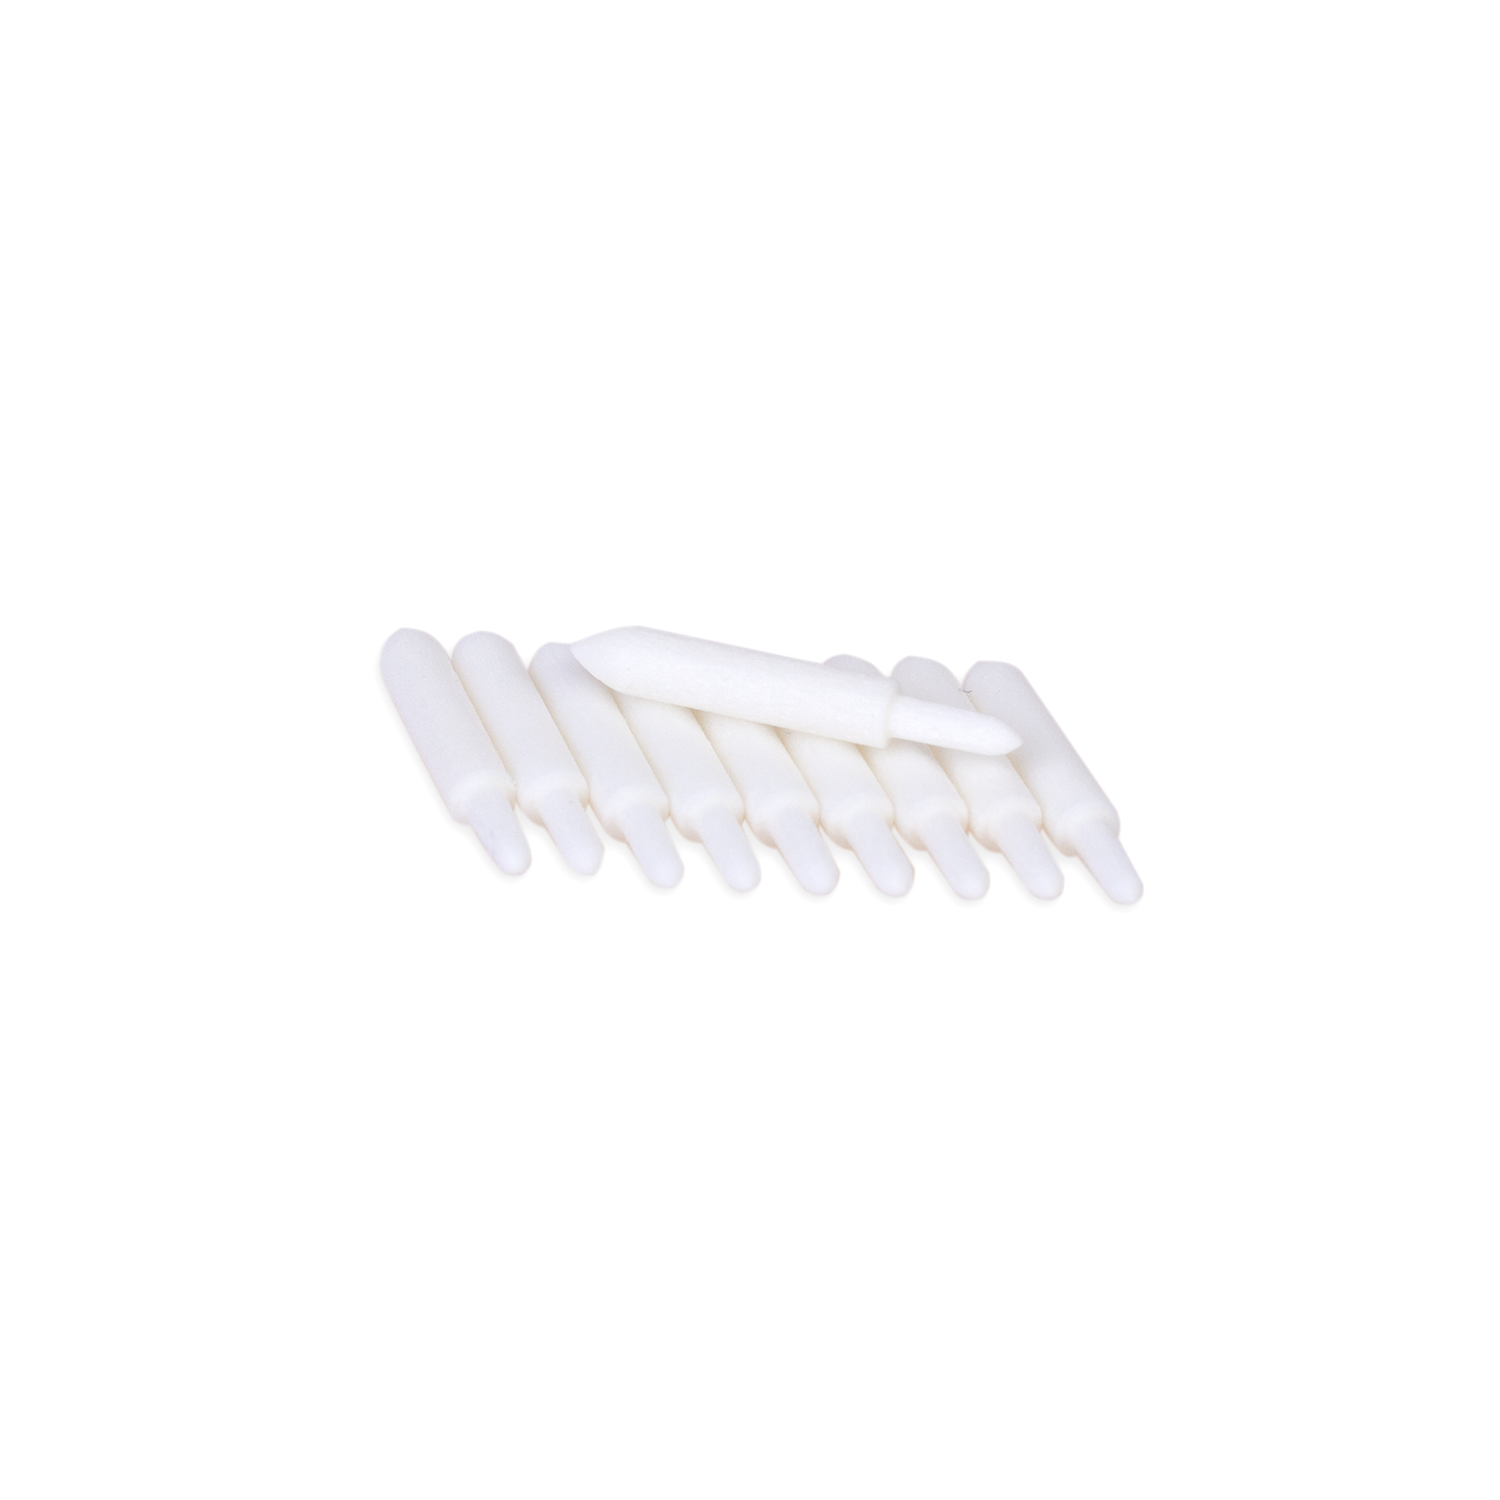 Felt tips for pen plating, thin, white (25 pieces)